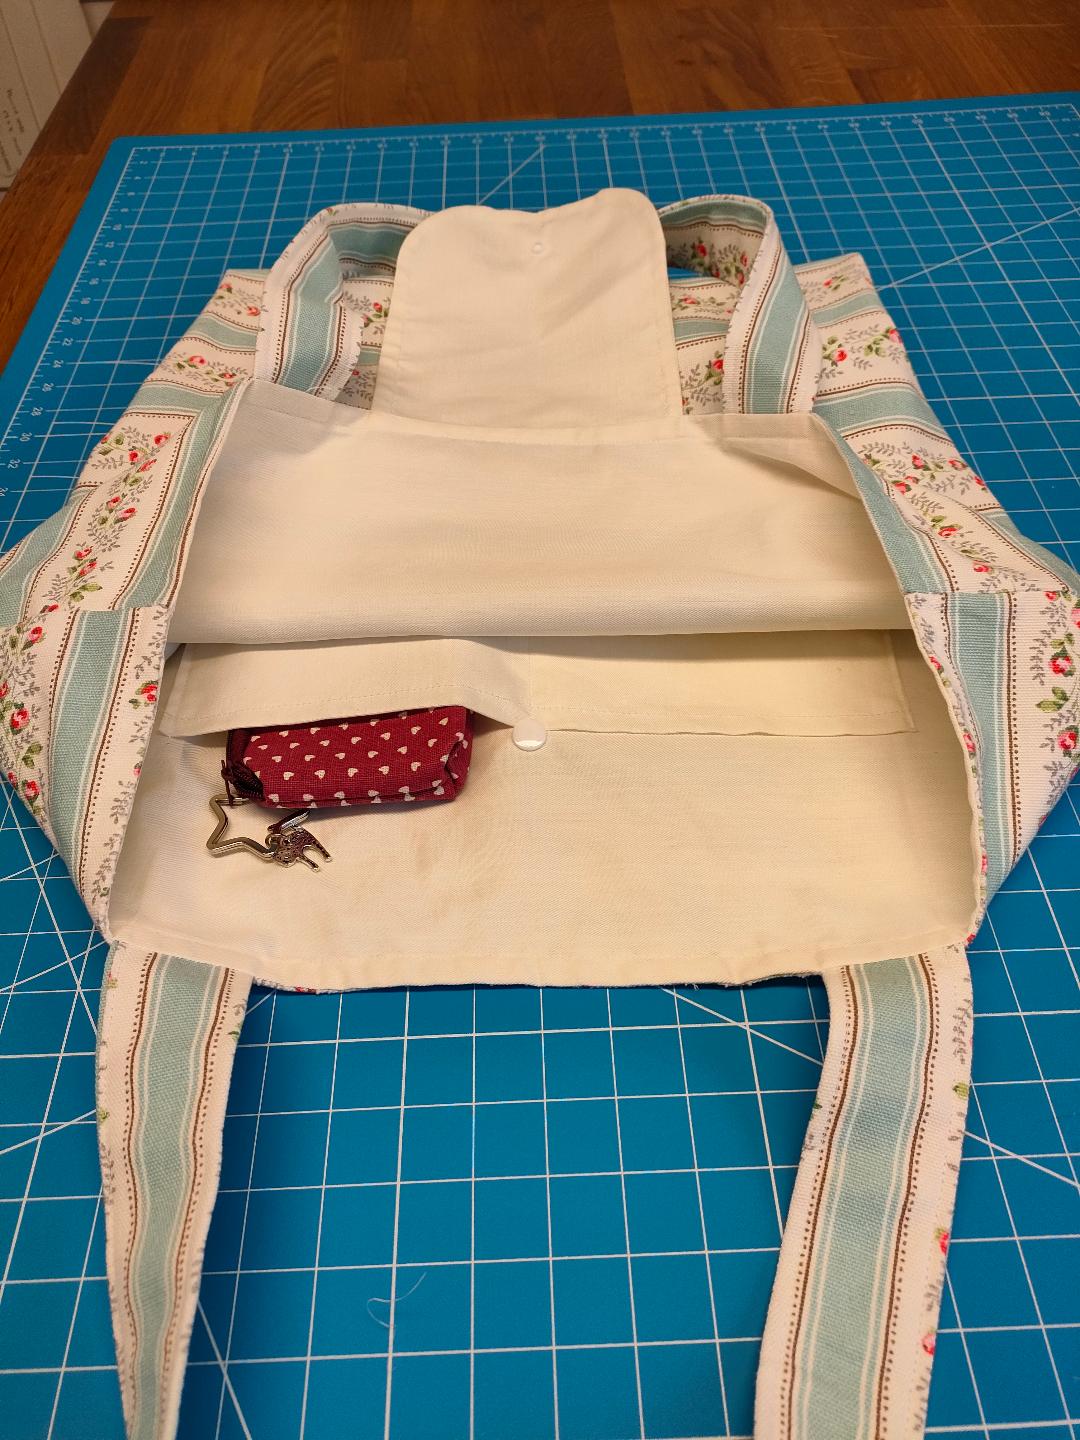 Beginners make your own Cute Tote Bag.